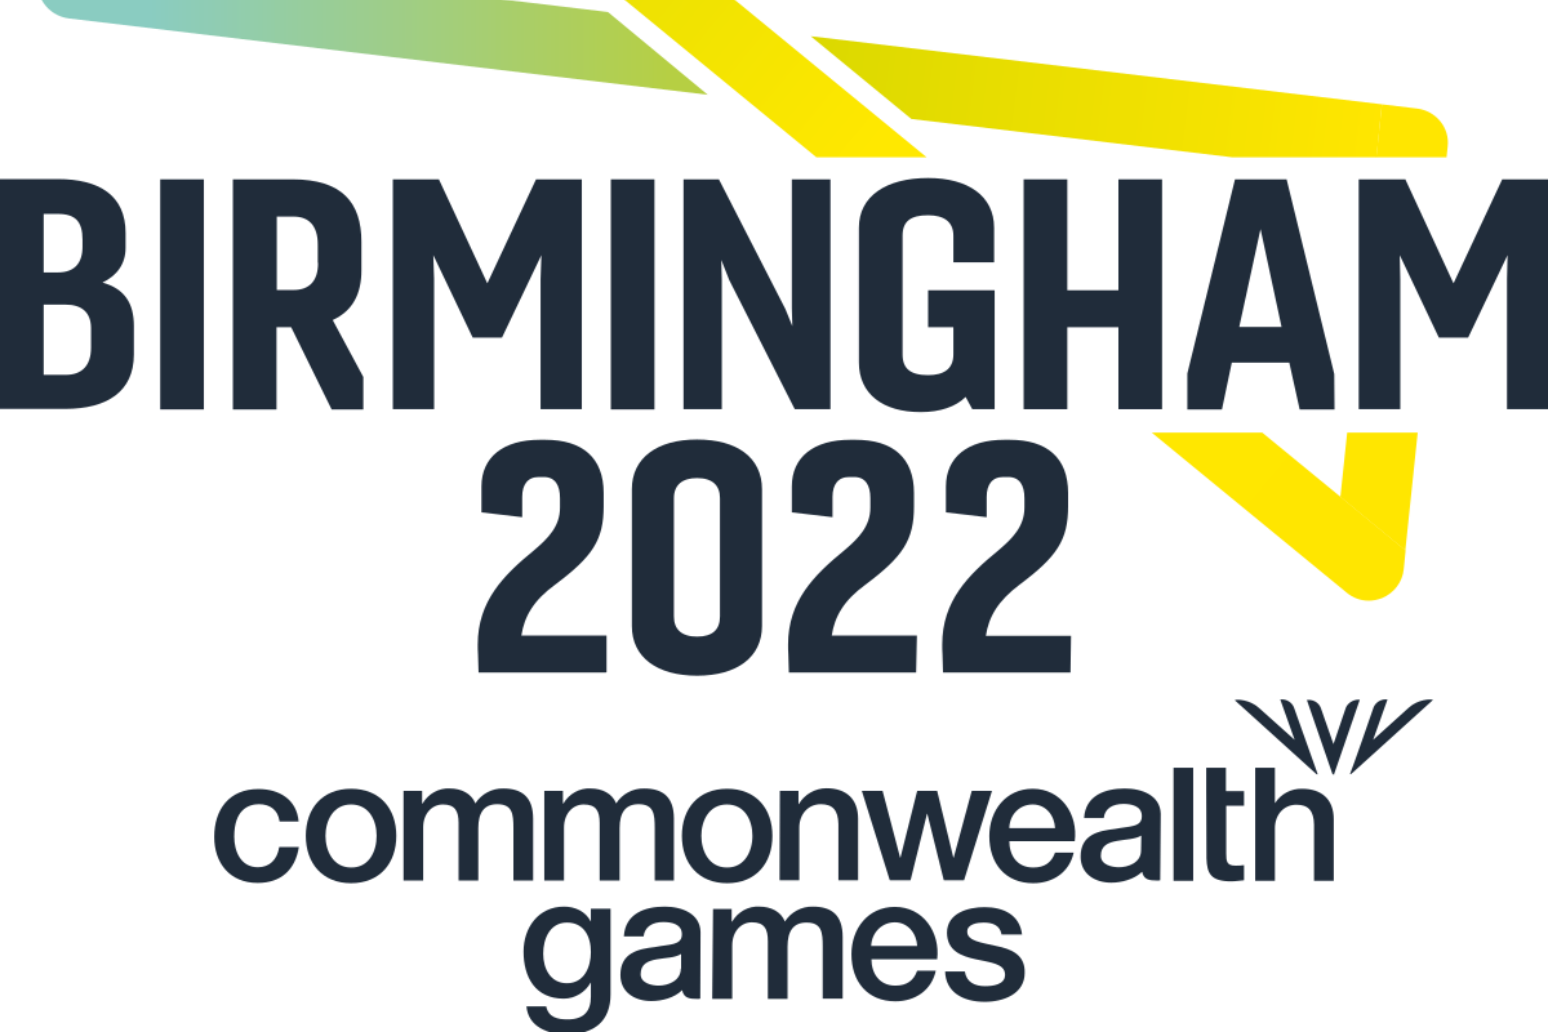 Athletes at Commonwealth Games free to make positive expressions in Birmingham